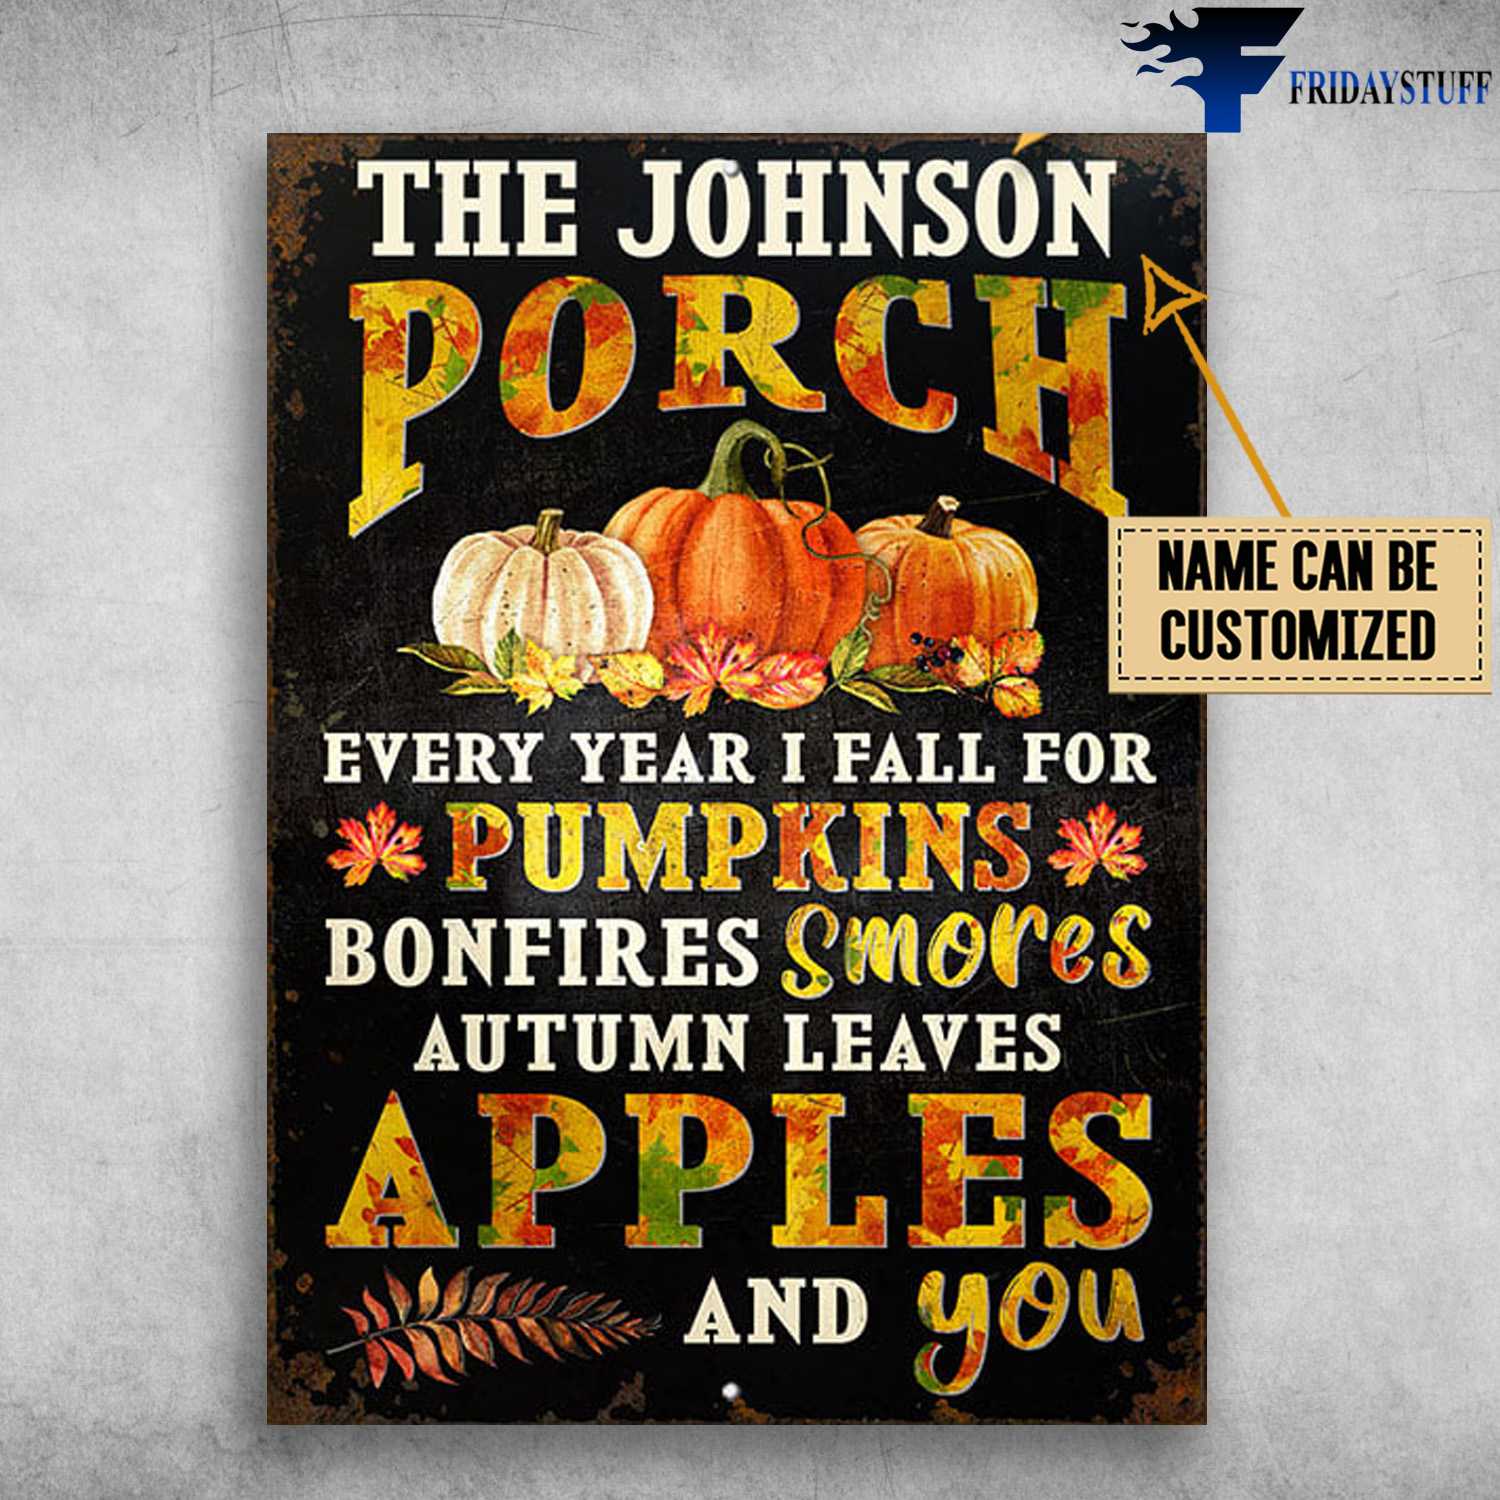 Pumpkins Poster, Porch Every Year I Fall For Pumpkins, Bonfires Smores Autumn Leaves, Apples And You